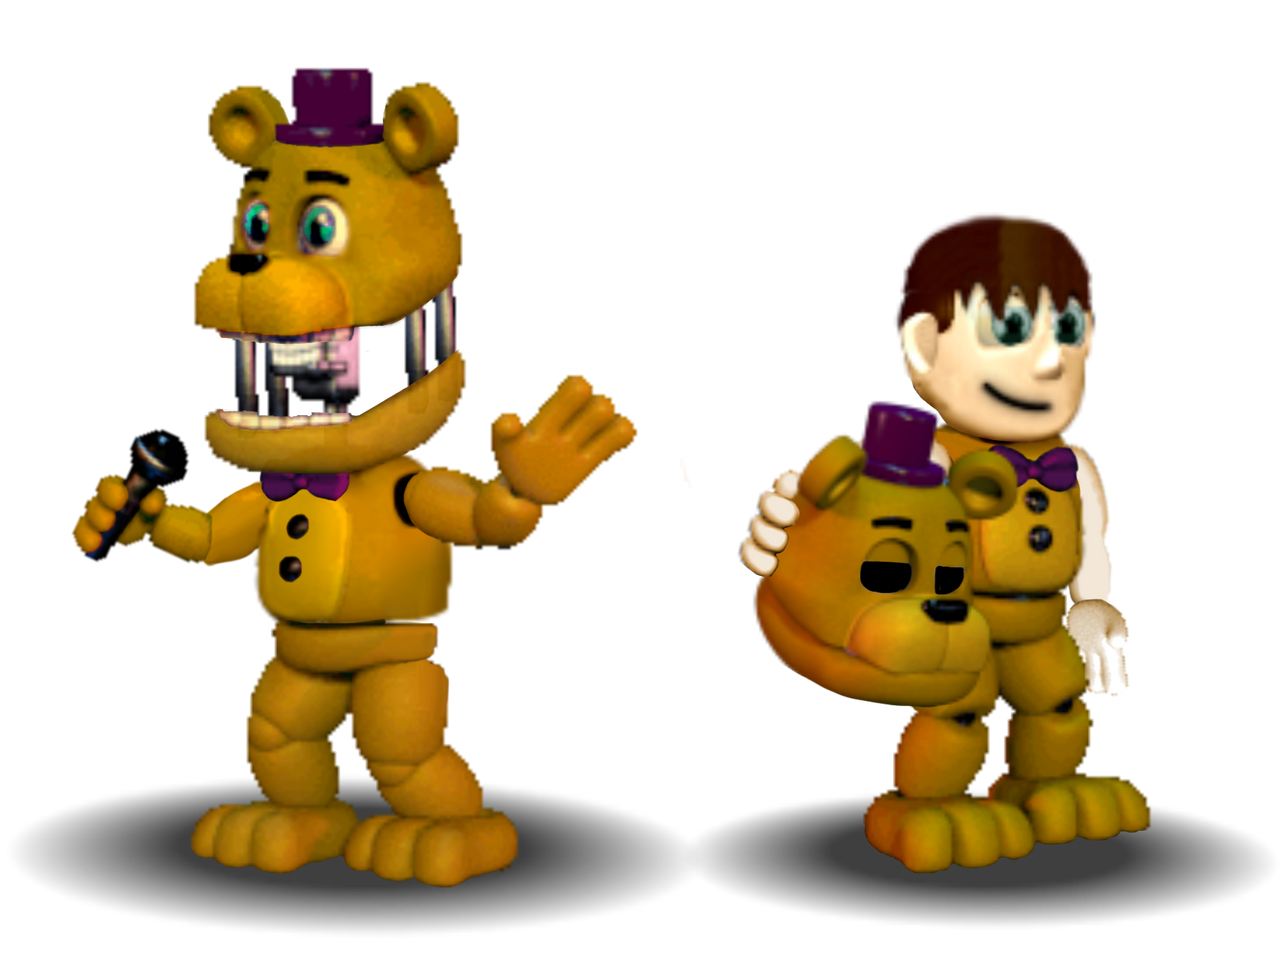 Mobile FNaF World - We Did It, Guys! by FreddleFrooby on DeviantArt